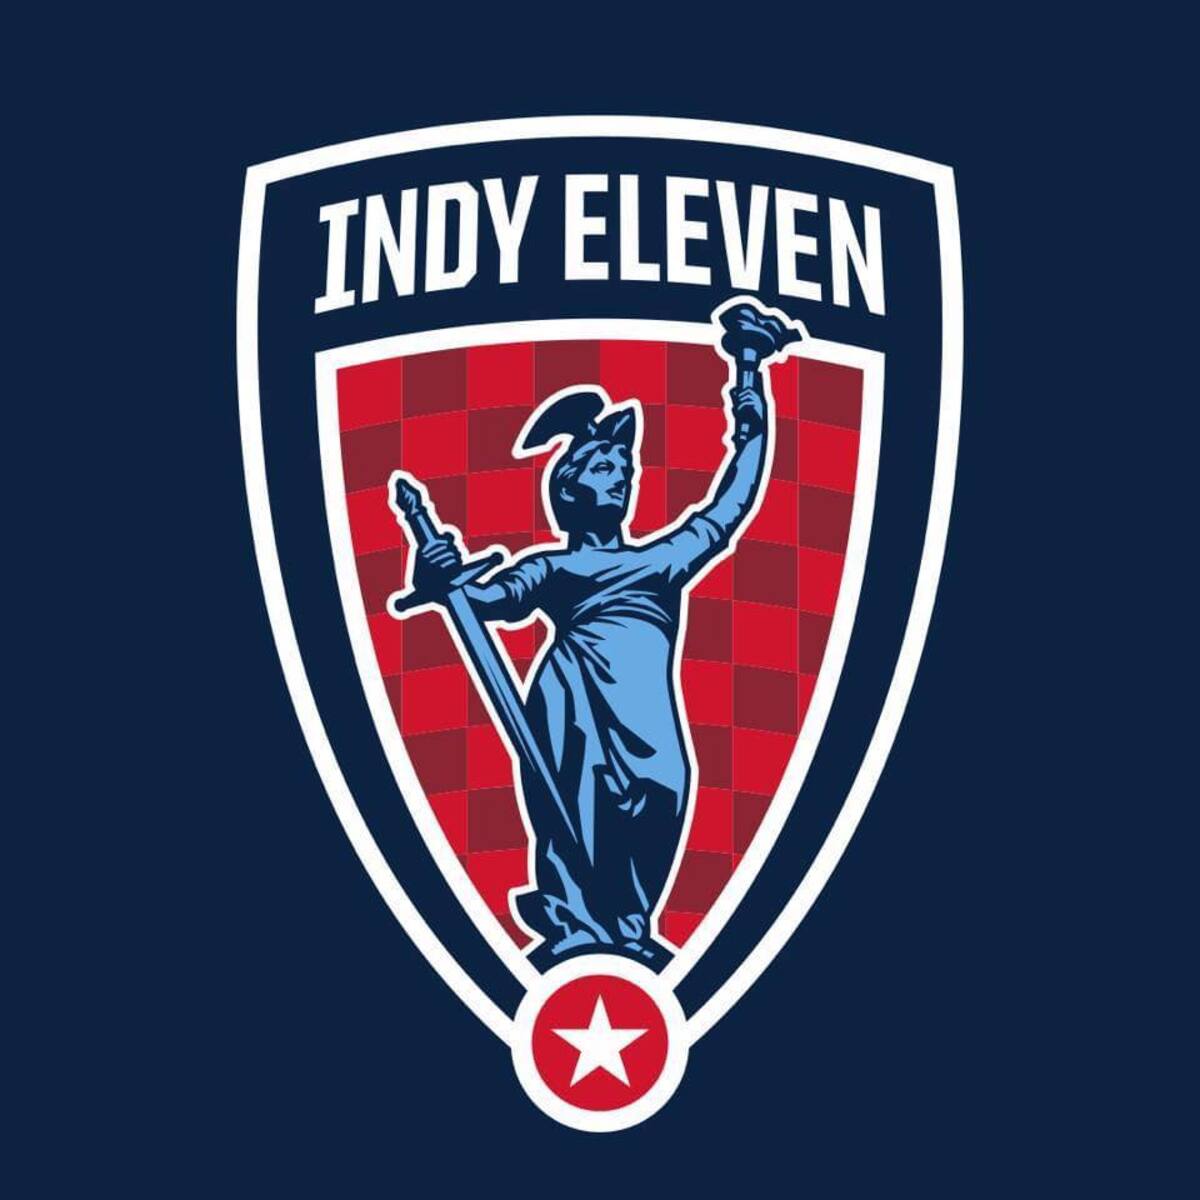 indy-eleven-12-football-club-facts